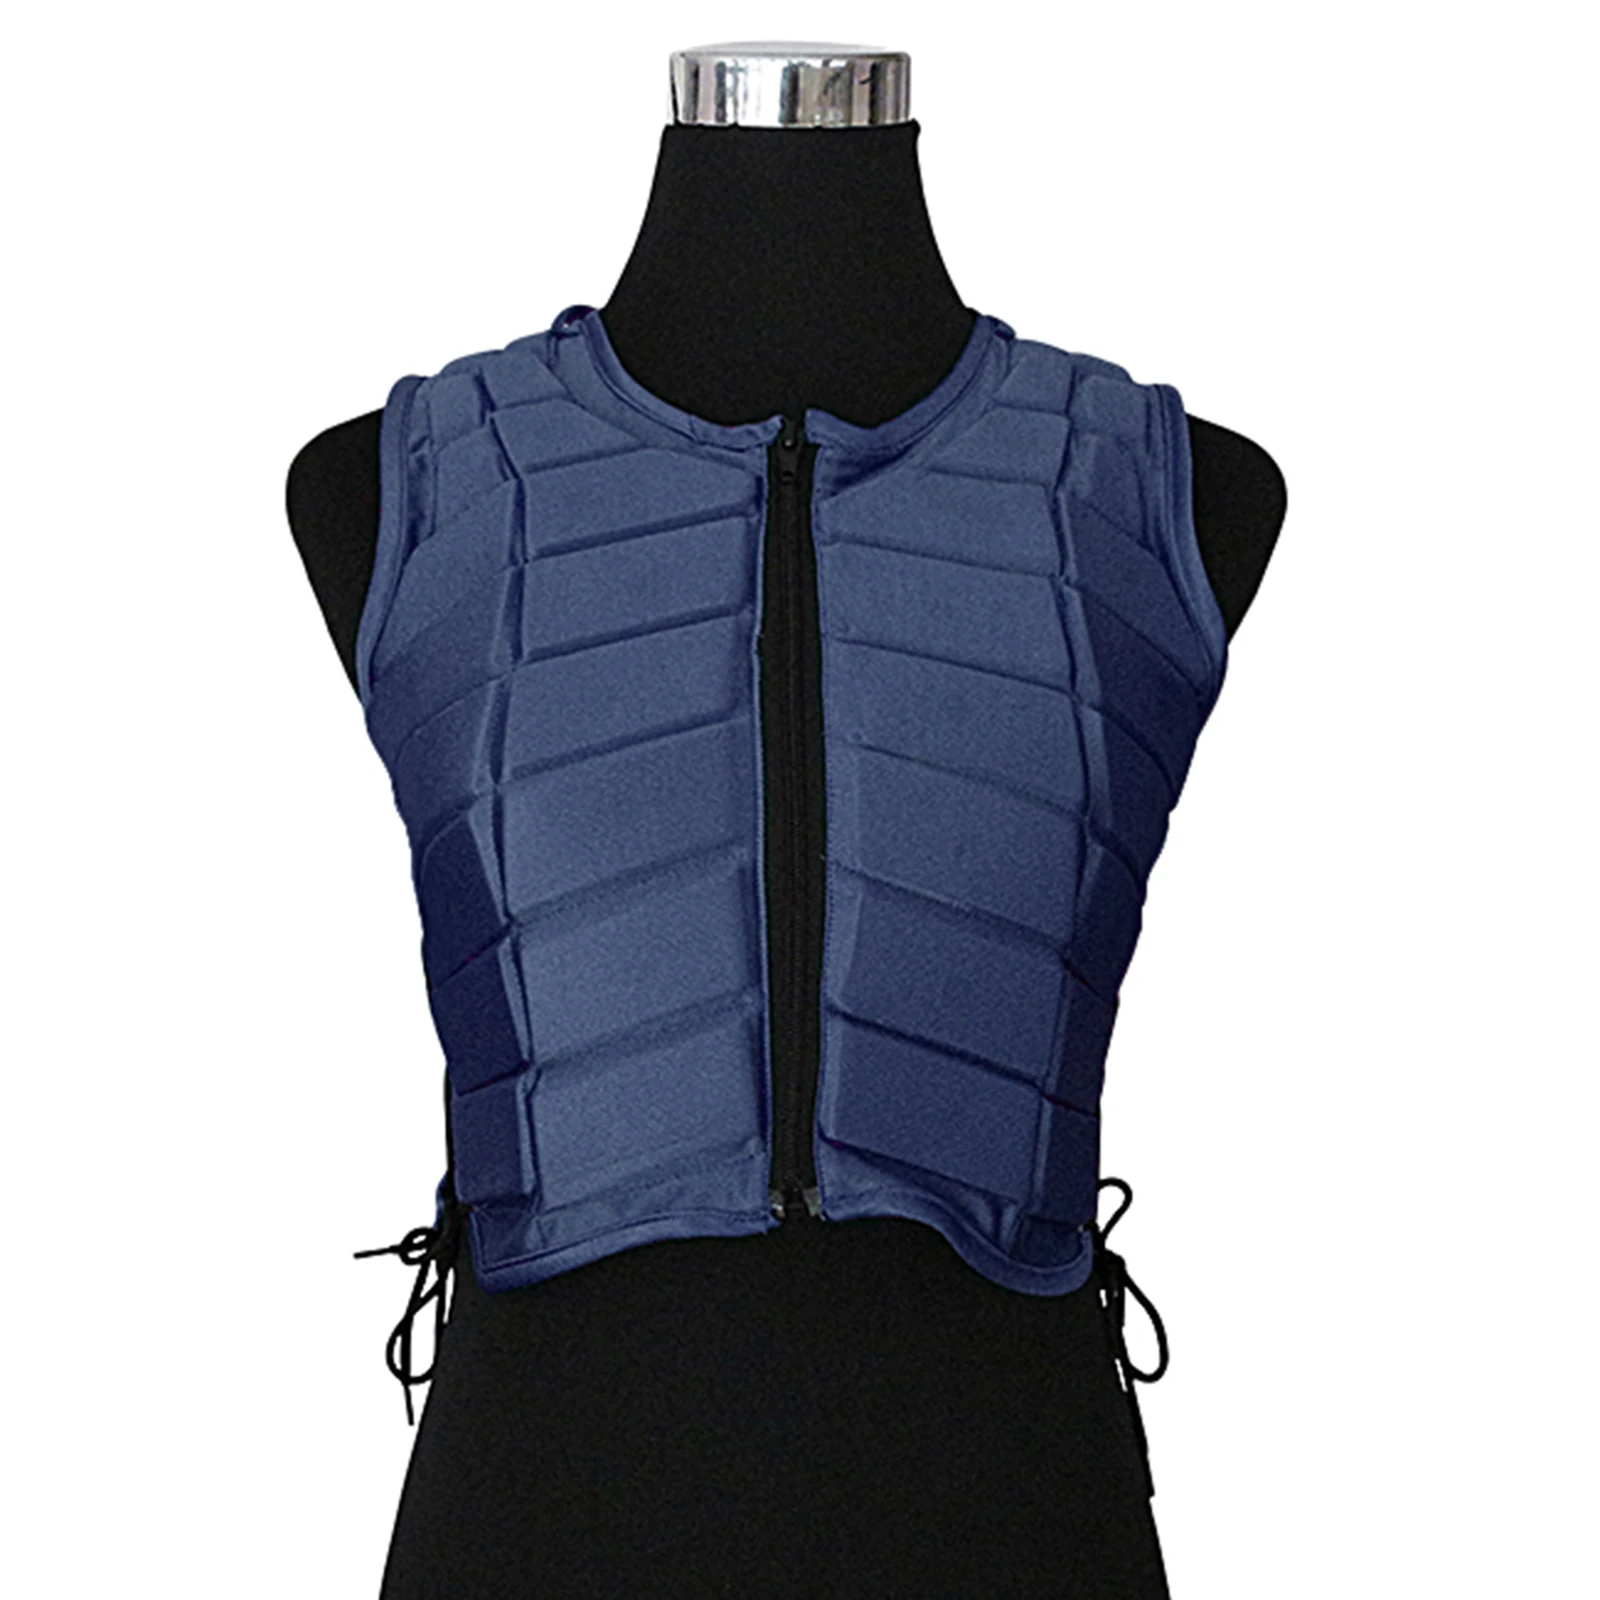 Adjustable Equestrian Protective Gear Safety Riding Waistcoat Jacket Perfeclan Breathable EVA Padded Horse Riding Vest 